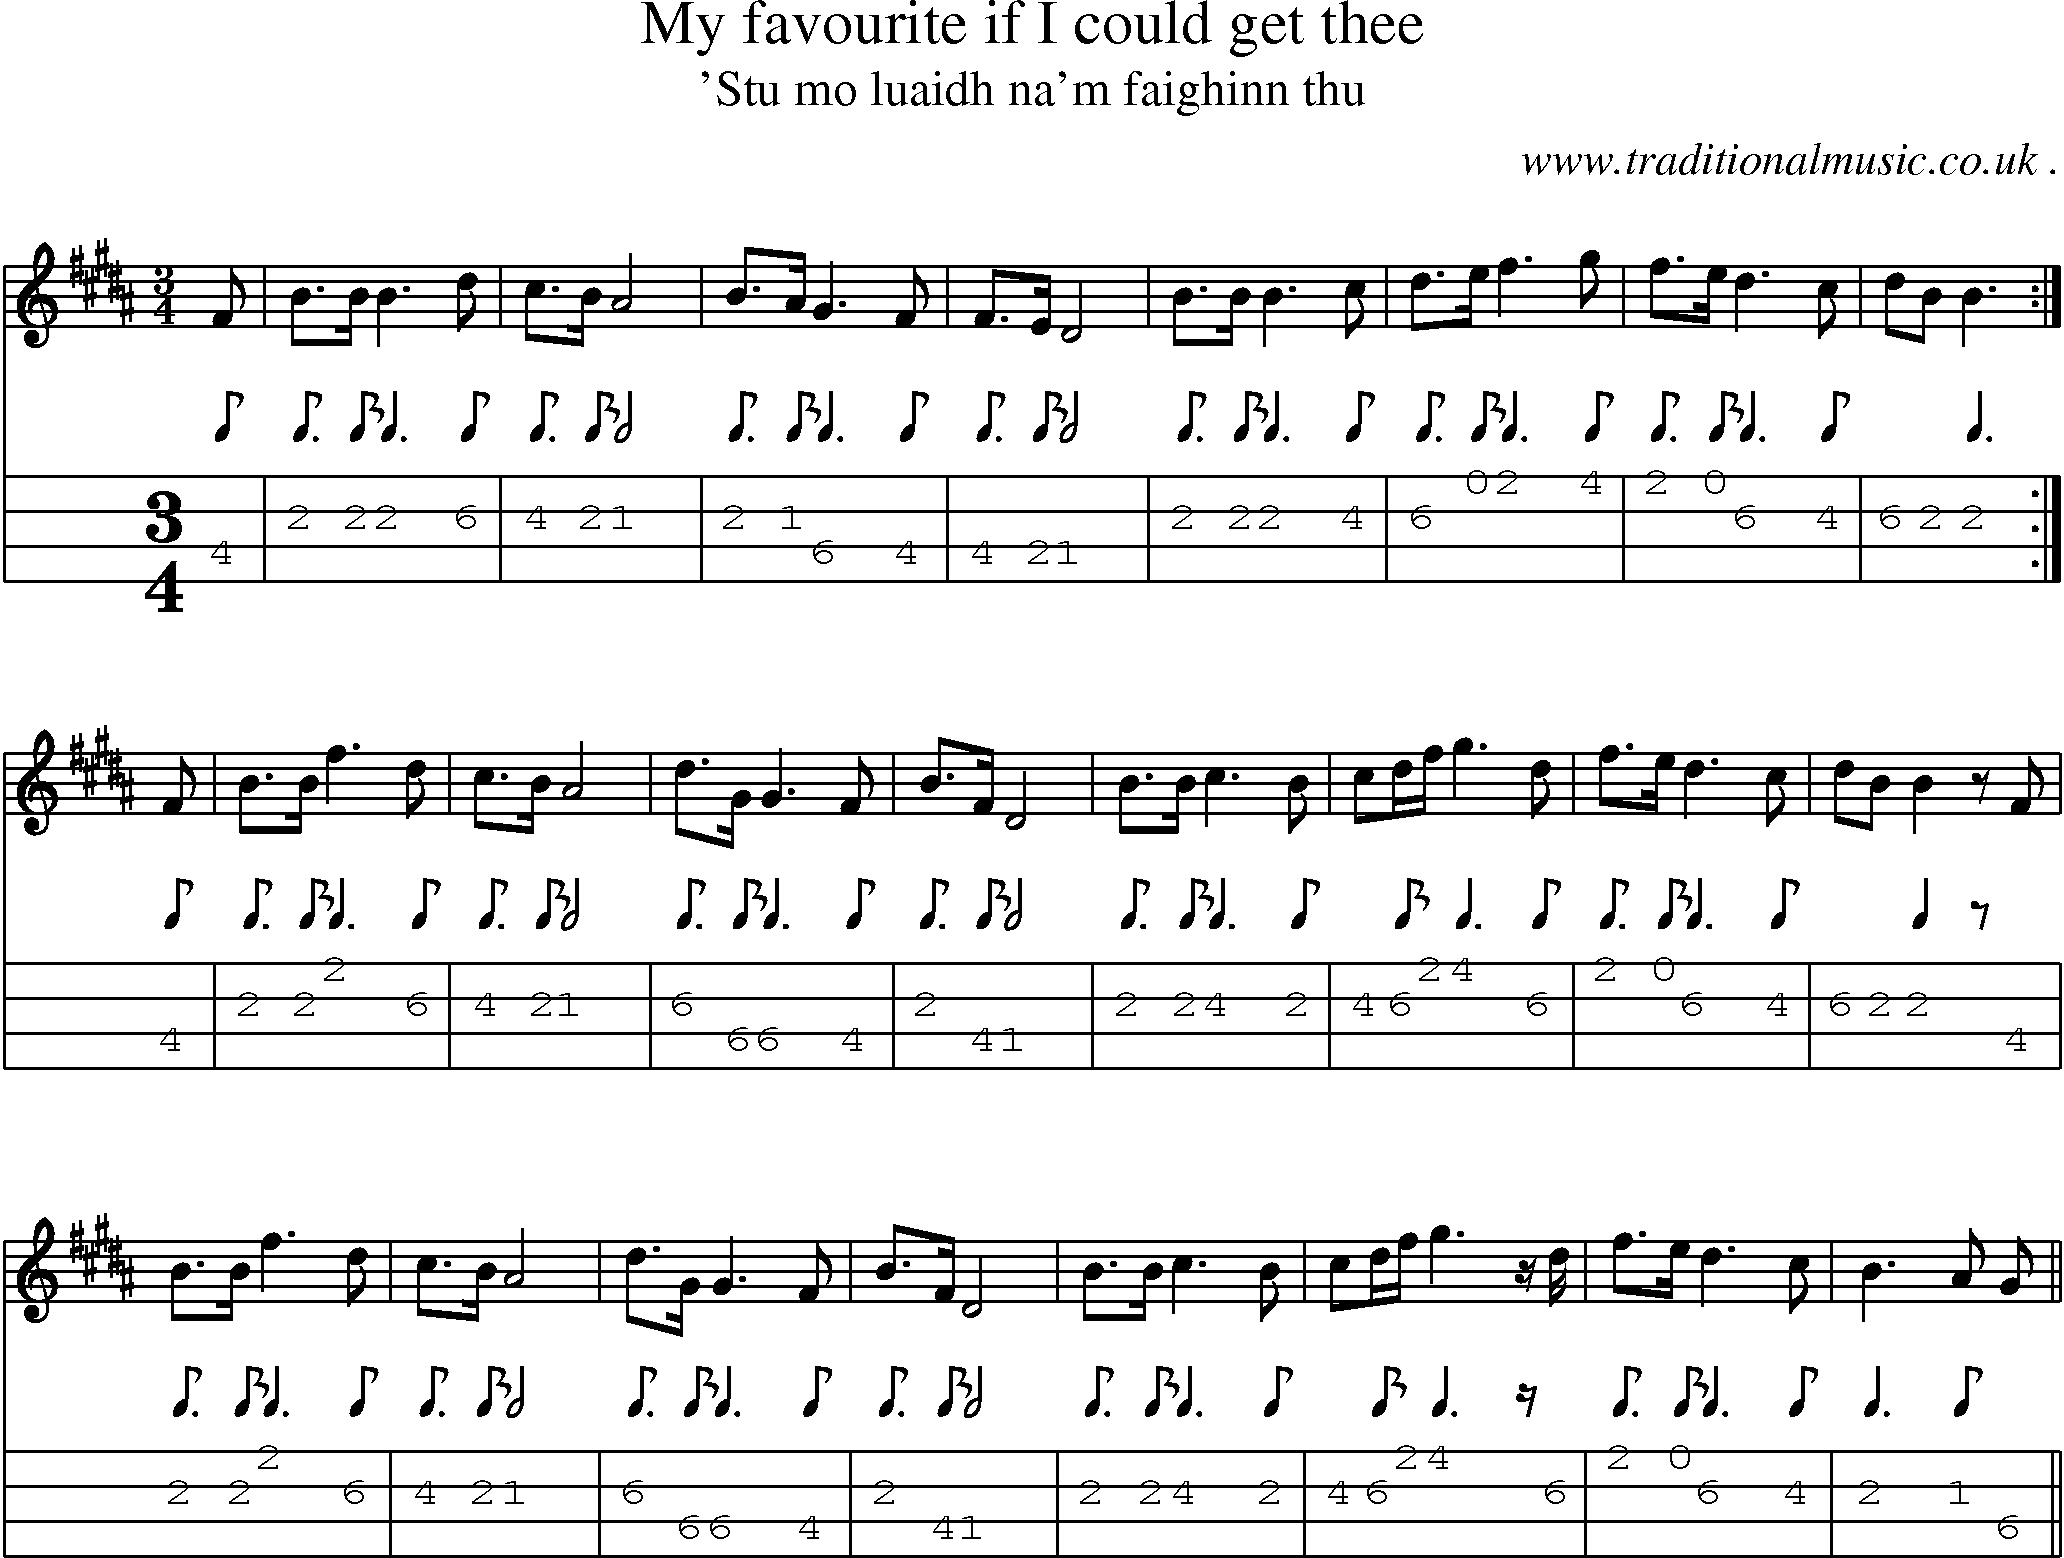 Sheet-music  score, Chords and Mandolin Tabs for My Favourite If I Could Get Thee